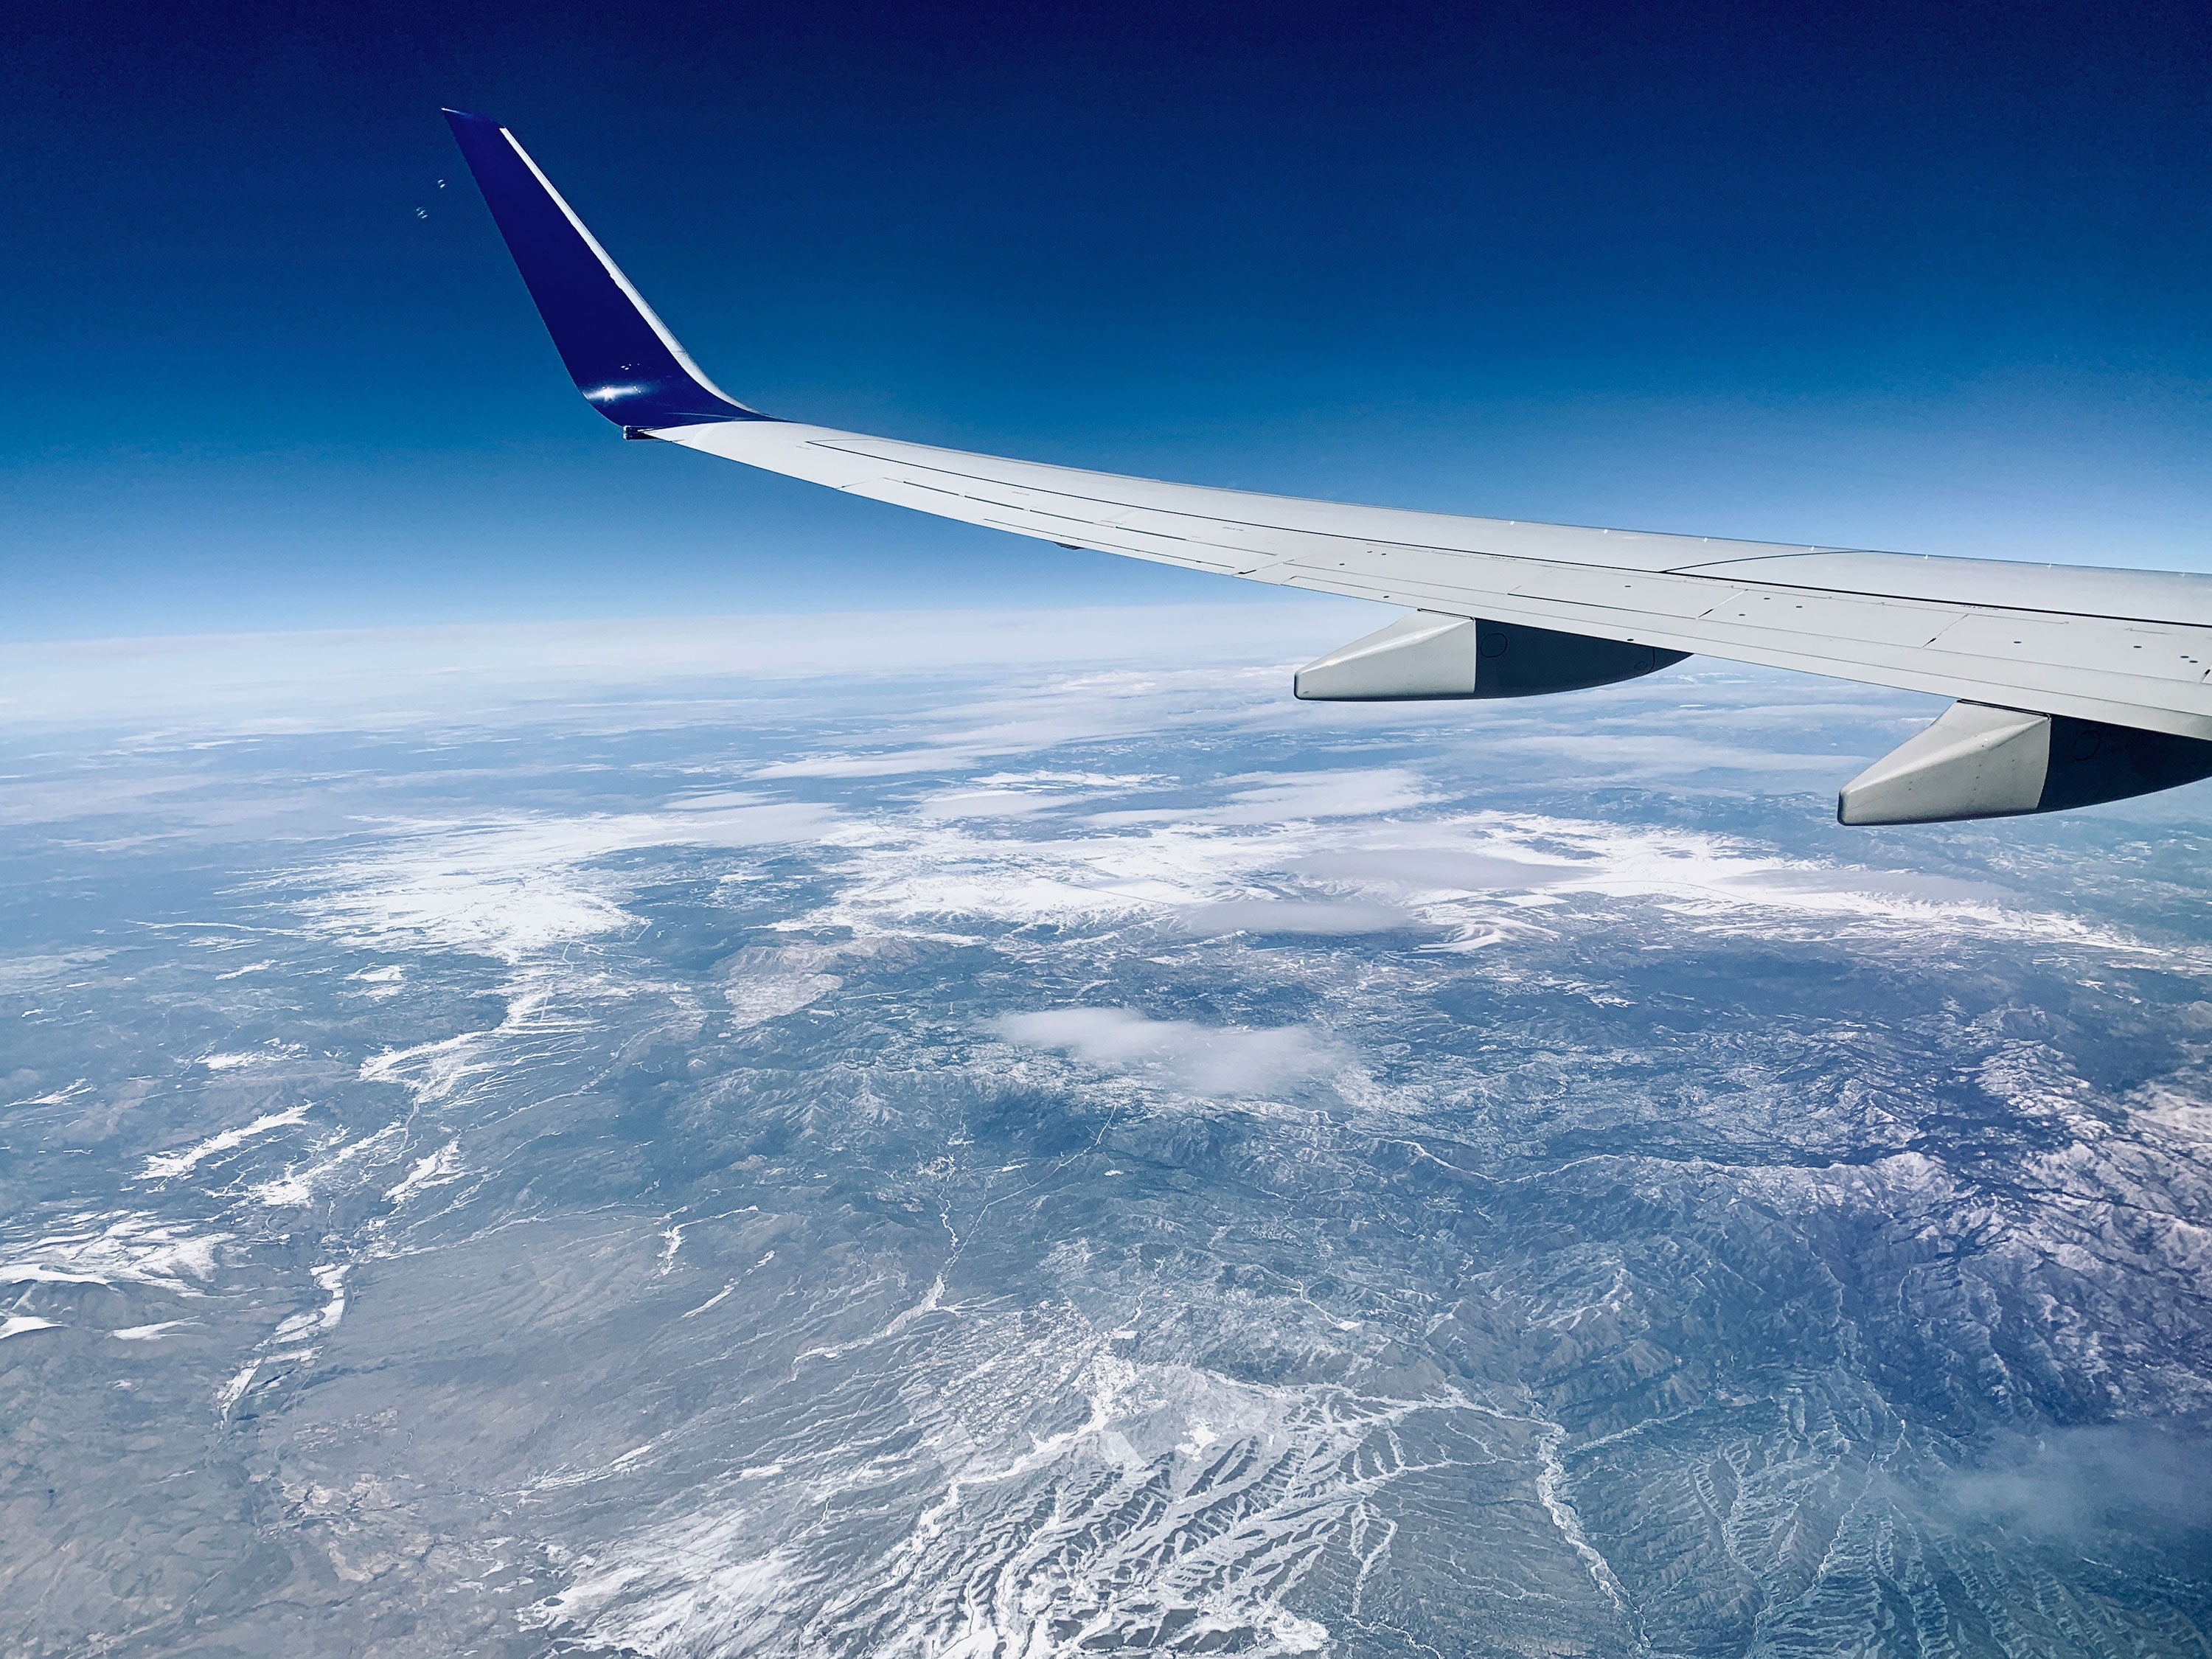 delta-wing-airplane-view-mountains-window-landscape